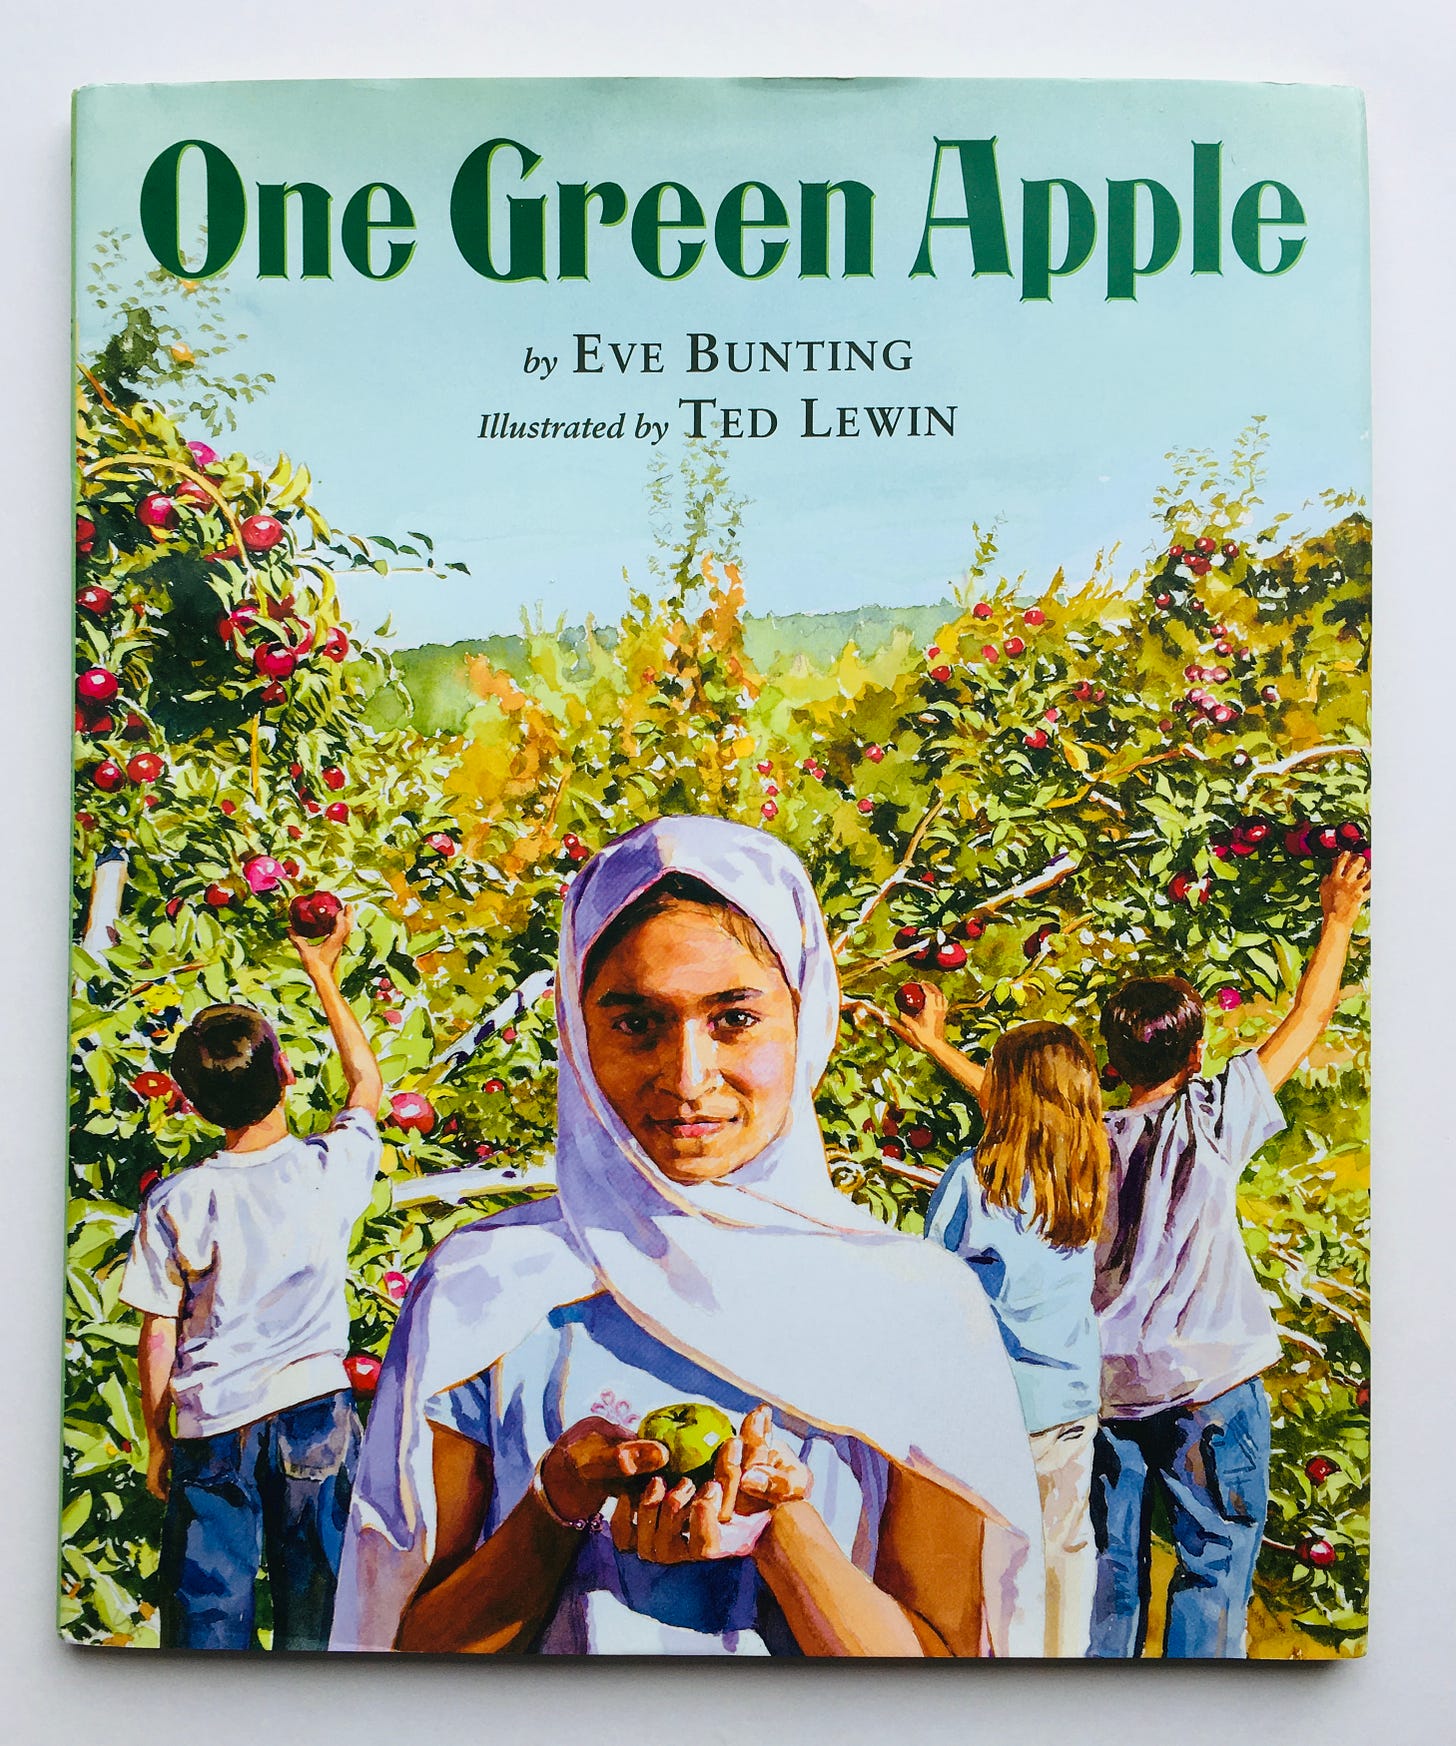 A girl with her head covered holds up a green apple in front of other children picking apples from trees